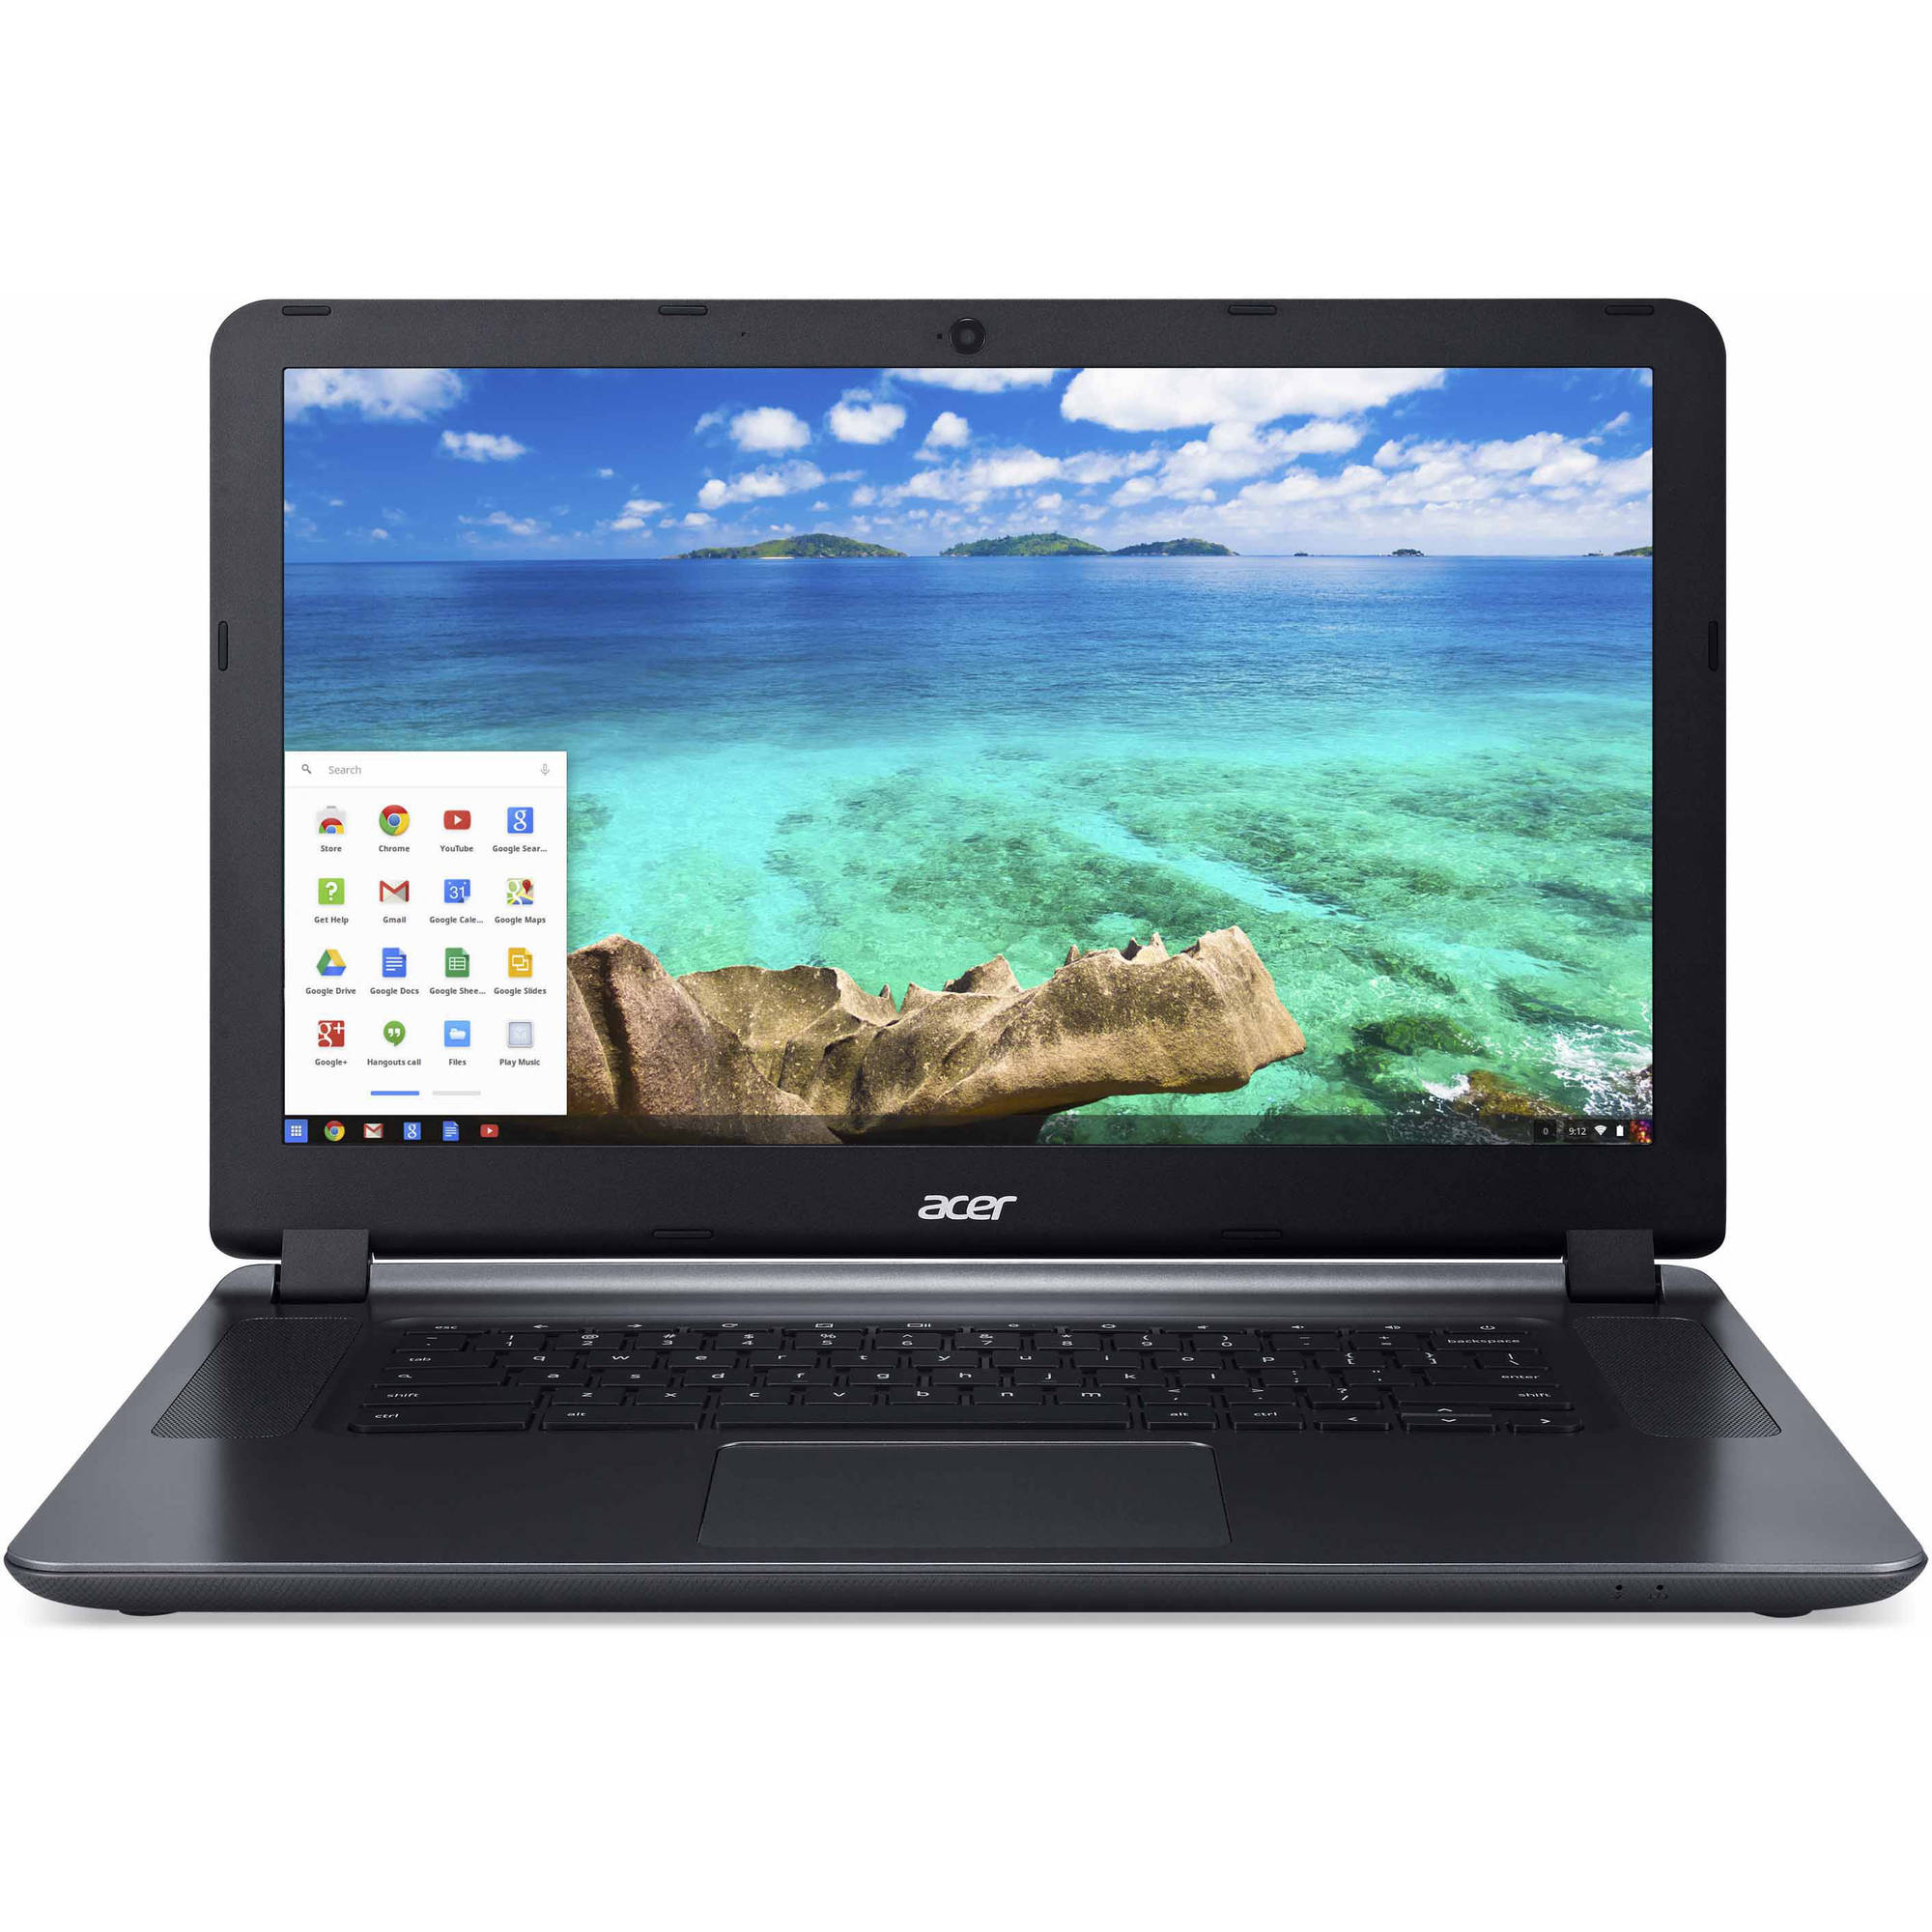 Acer Granite Gray 15.6" CB3-531-C4A5 Chromebook PC with Intel Celeron N2830 Dual-Core Processor, 2GB Memory, 16GB Hard Drive and Chrome OS - image 1 of 9